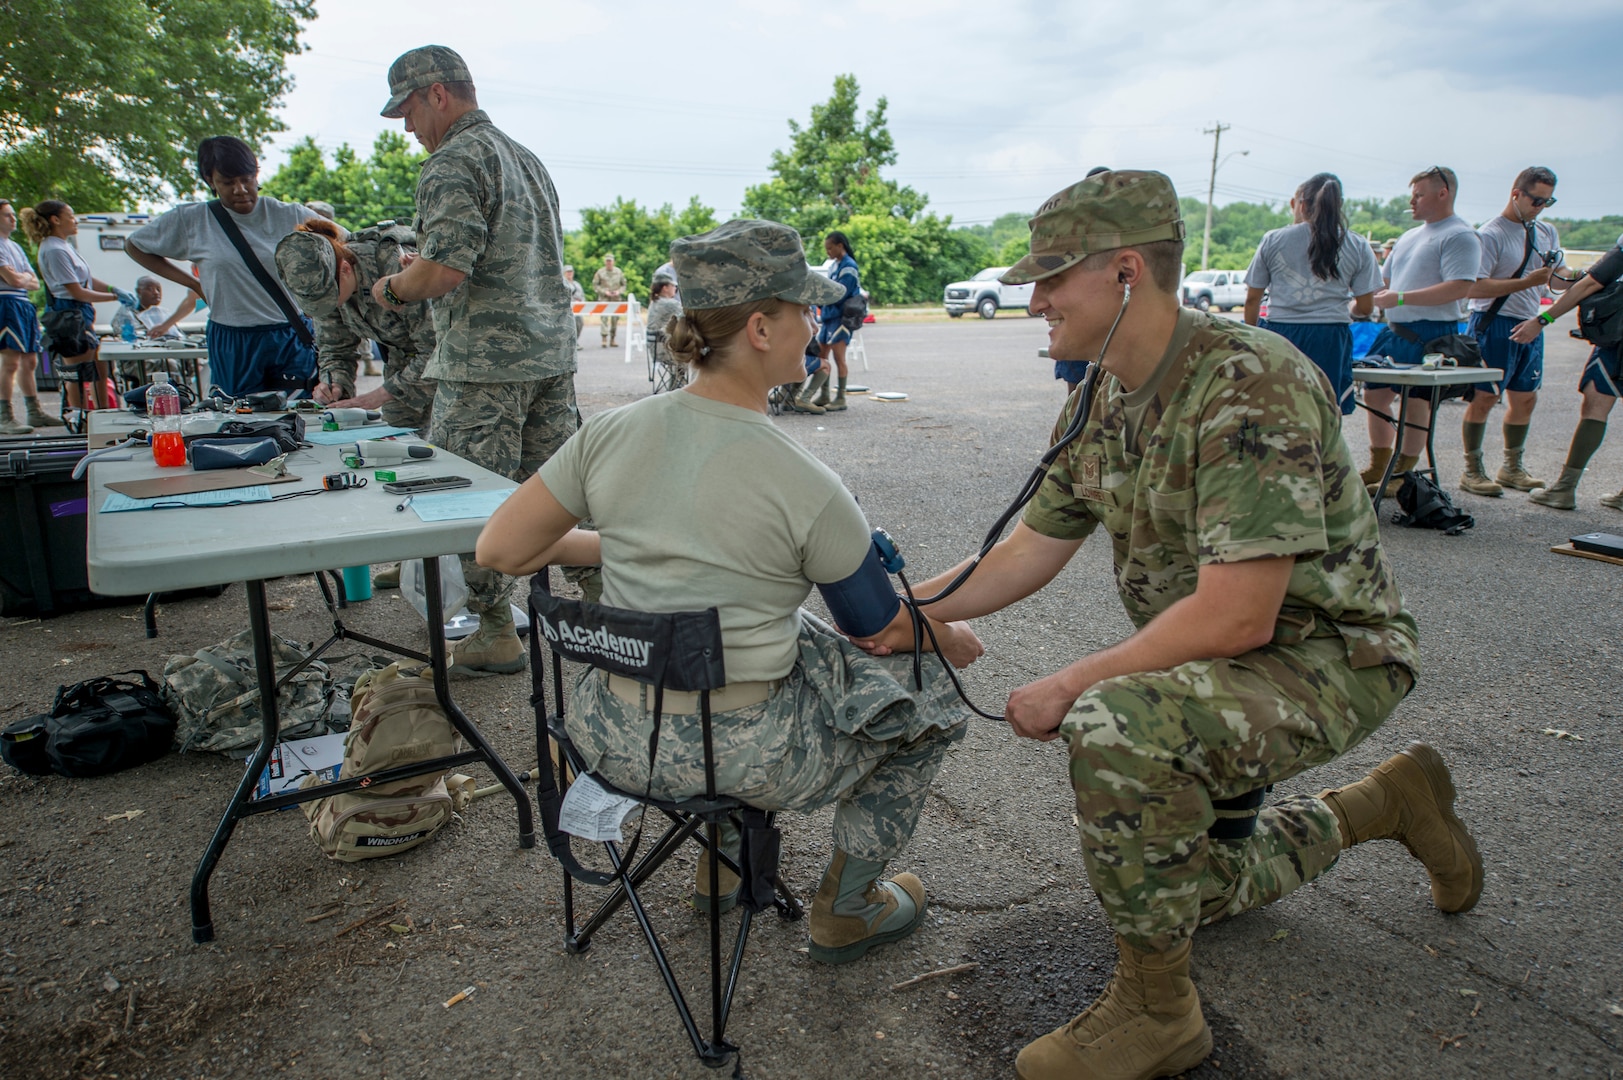 Members of the 116th Medical Group, Detachment 1, check participants’ vital signs during FEMA exercise Shaken Fury 2019 on June 5 in Millington, Tenn. Forty-four medical and communications personnel with the 116th Air Control Wing, Georgia Air National Guard, served on the CBRNE Enhanced Response Force working alongside more than 200 Georgia National Guard soldiers, testing the synergy necessary to support the community during natural disasters like the simulated earthquake in the exercise. (U.S. Air National Guard photo by Tech. Sgt. Nancy Goldberger/RELEASED)